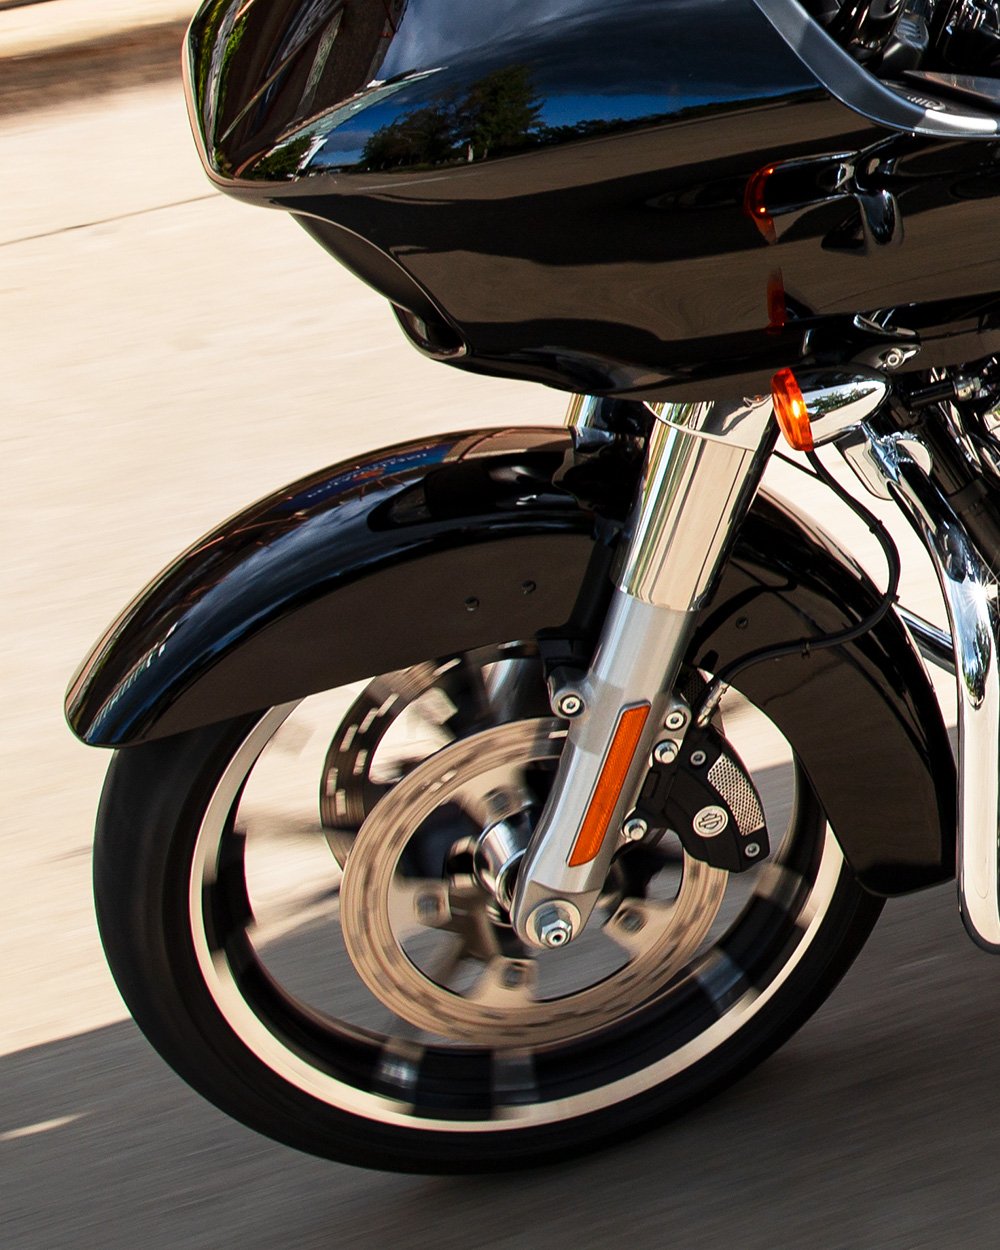 H-D on a 2022 Road Glide motorcycle